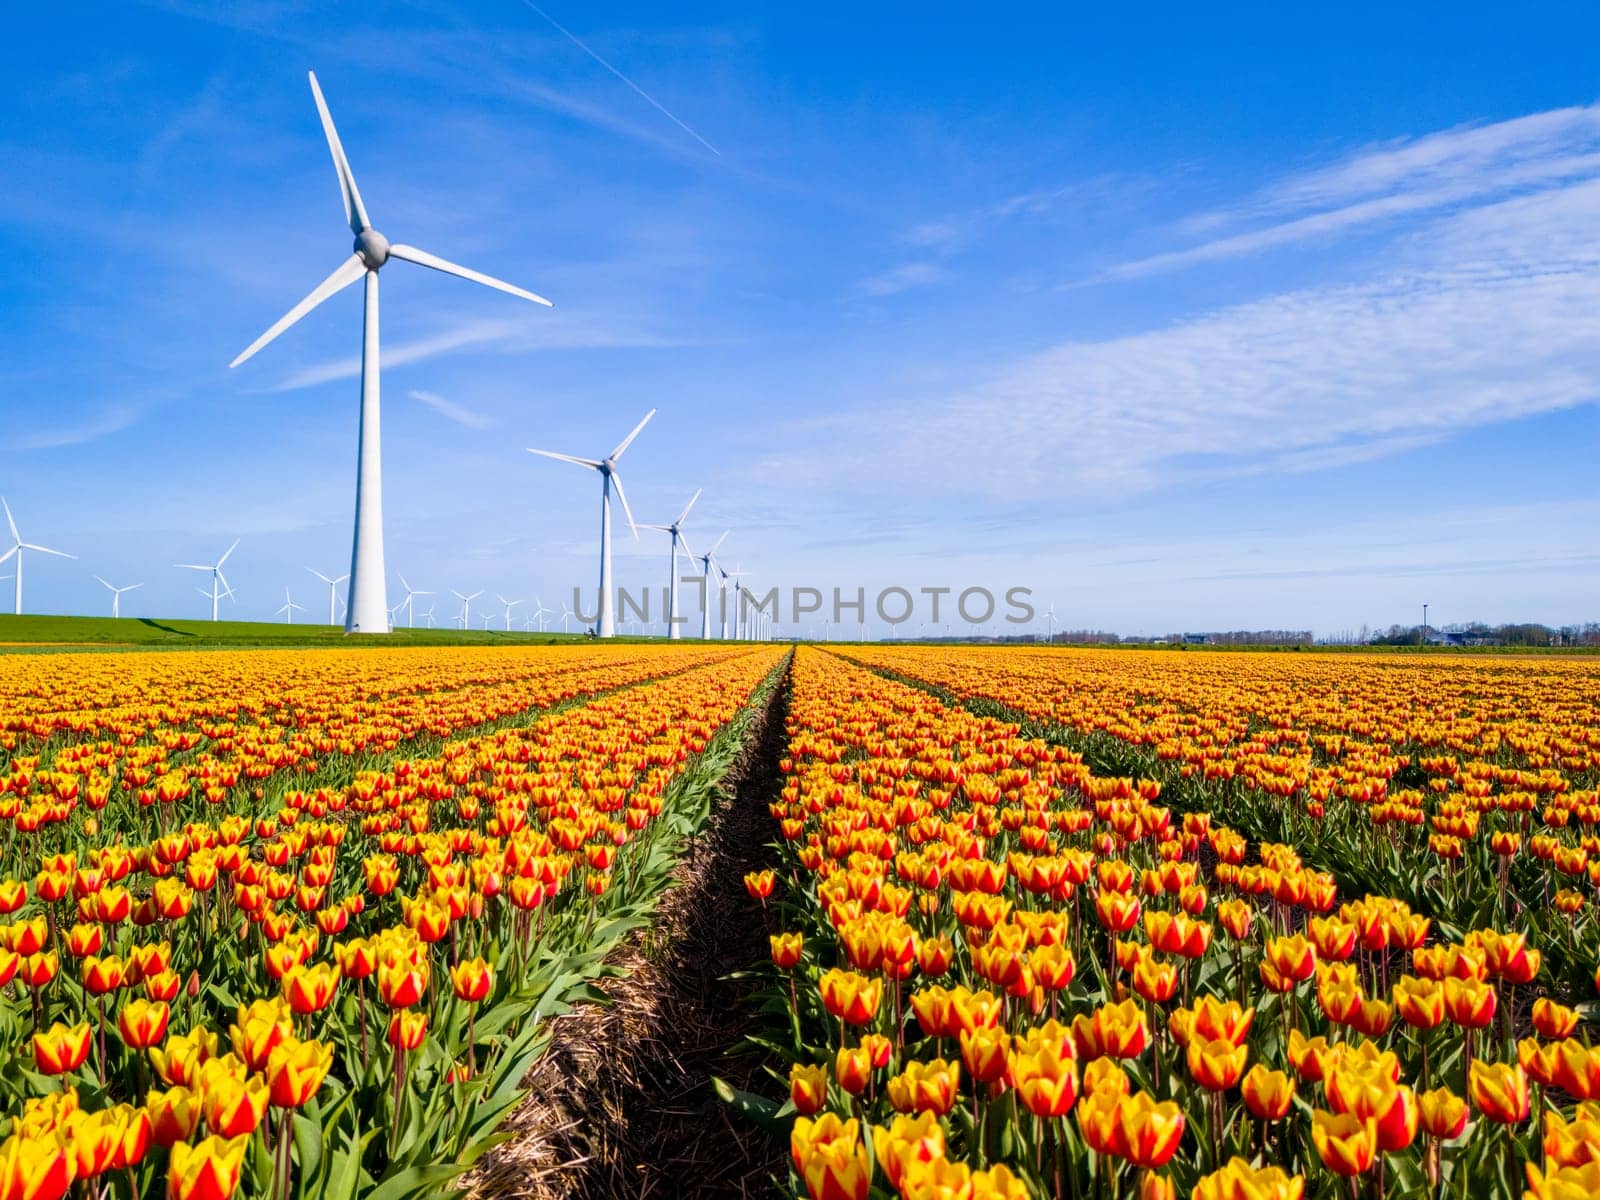 A picturesque scene of colorful flowers swaying in a field with towering windmills spinning in the background, set in the Netherlands Flevoland during the vibrant season of Spring. windmill turbines